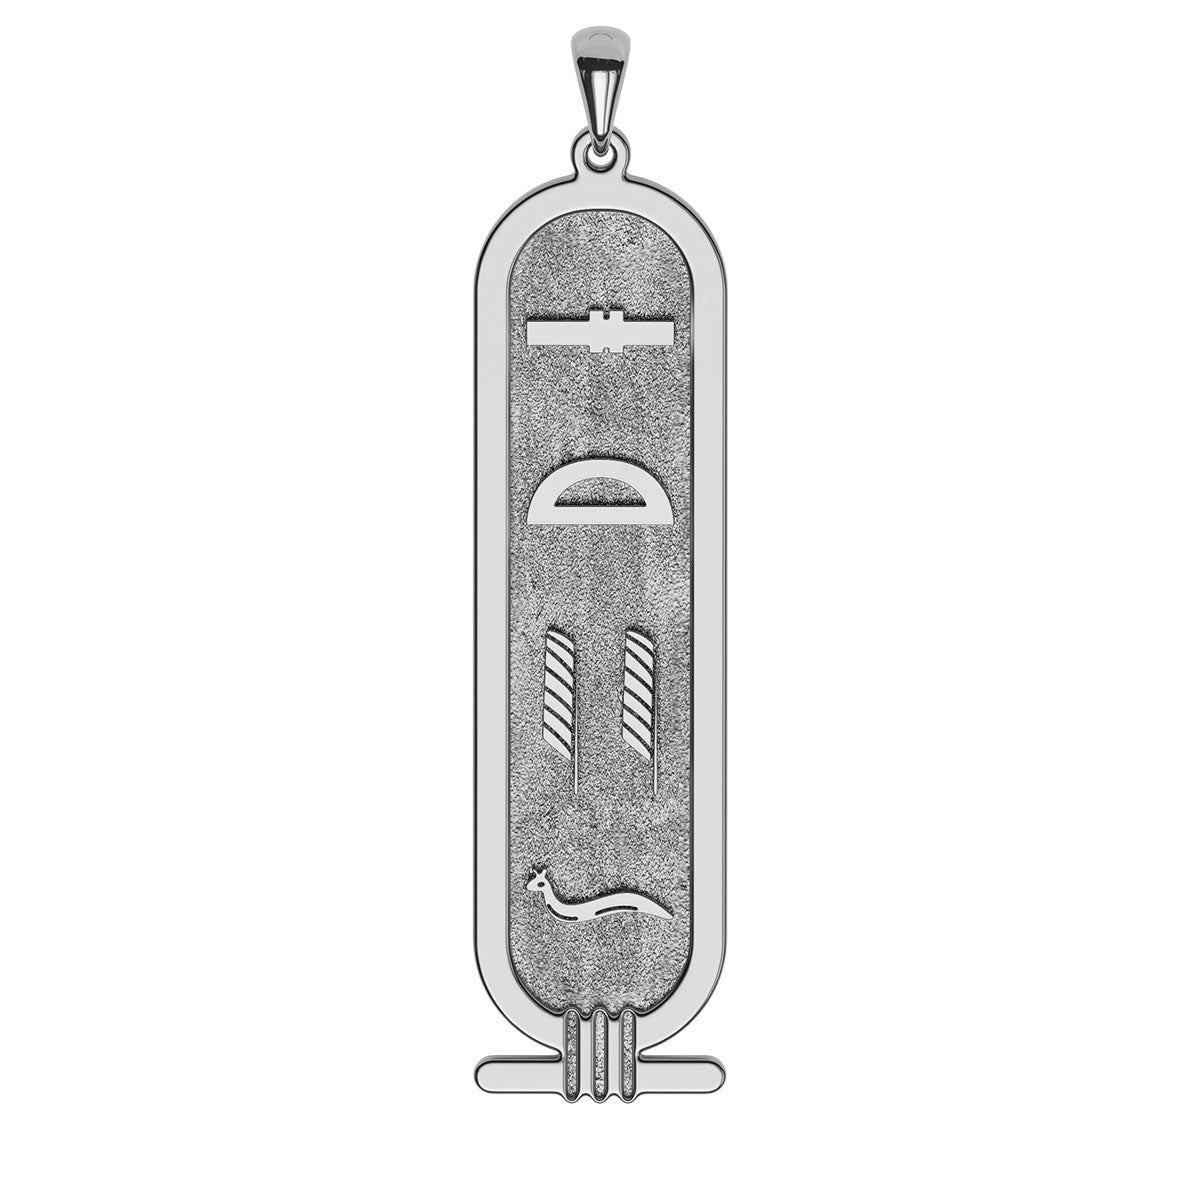 Personalized Cartouche Egyptian Hieroglyph Name Necklace with Back Engraving